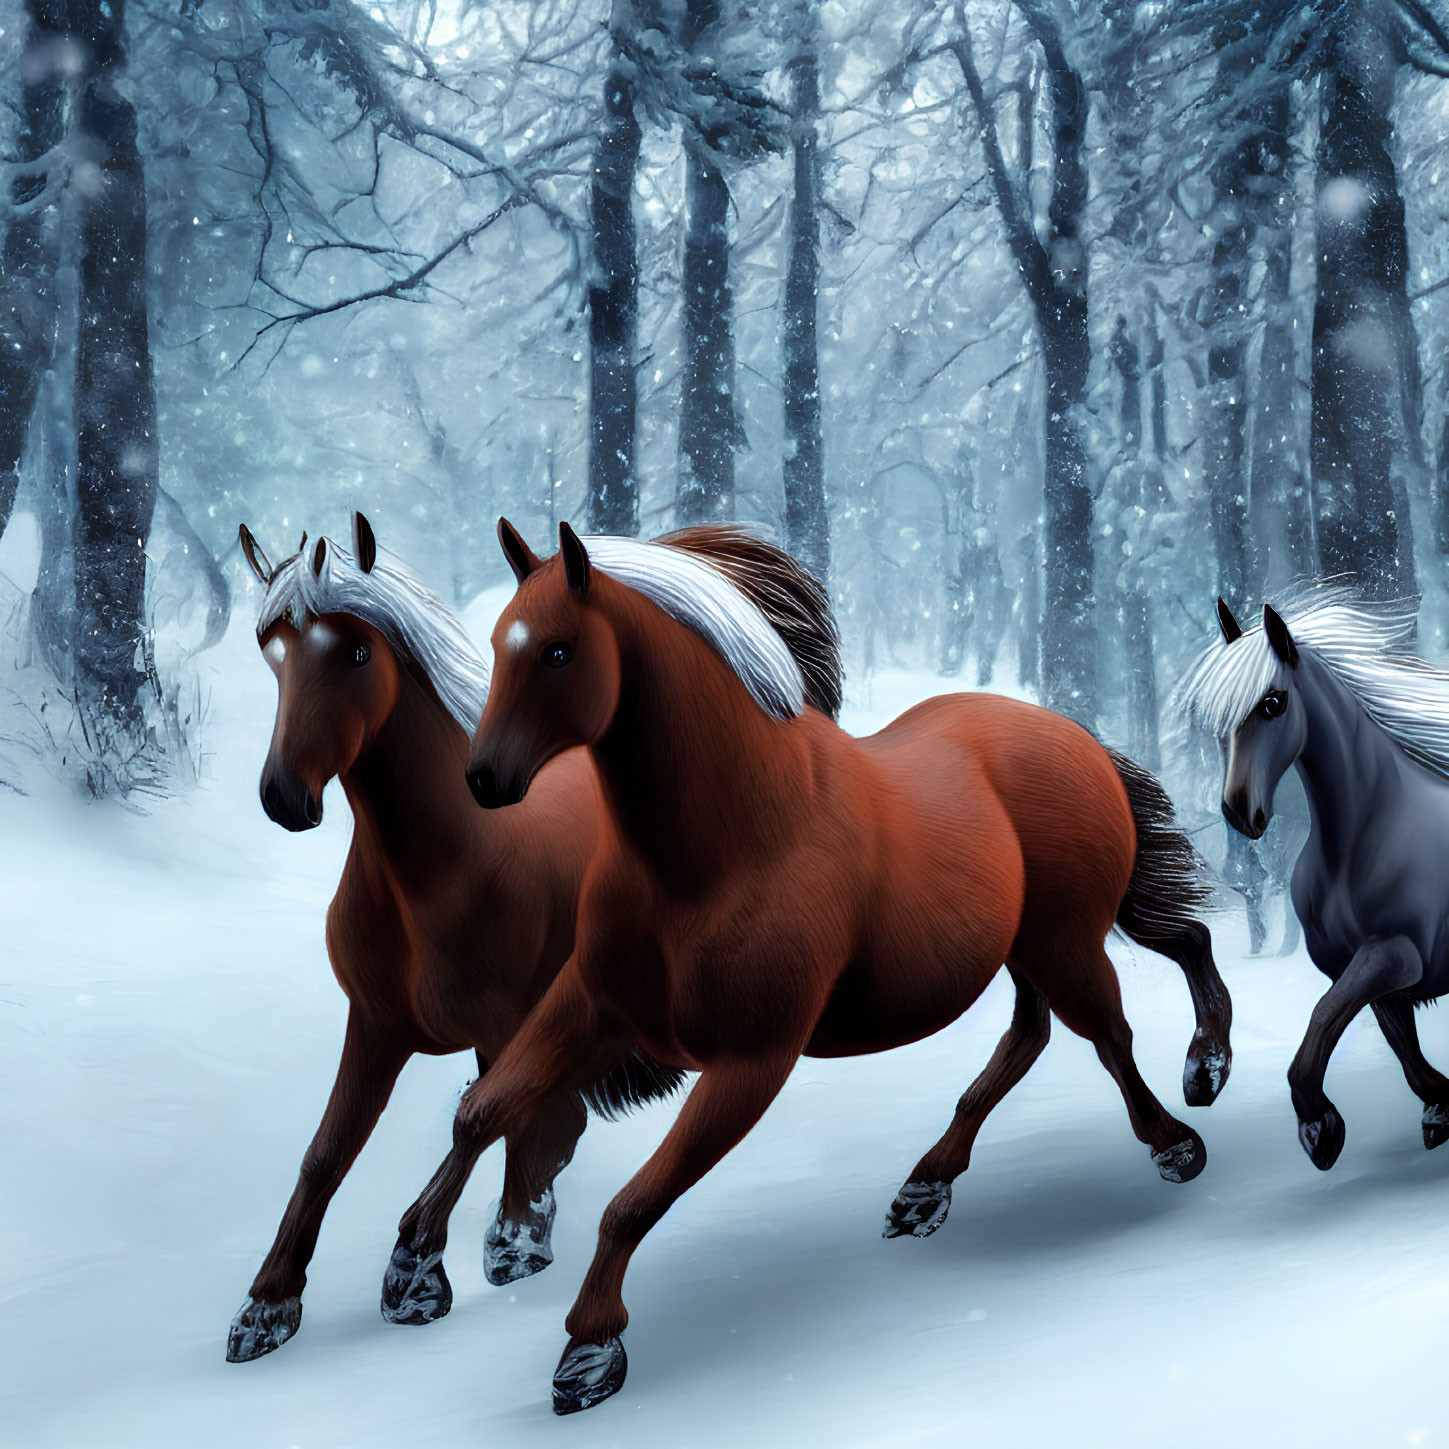 Three horses galloping in snowy forest with thick coats.